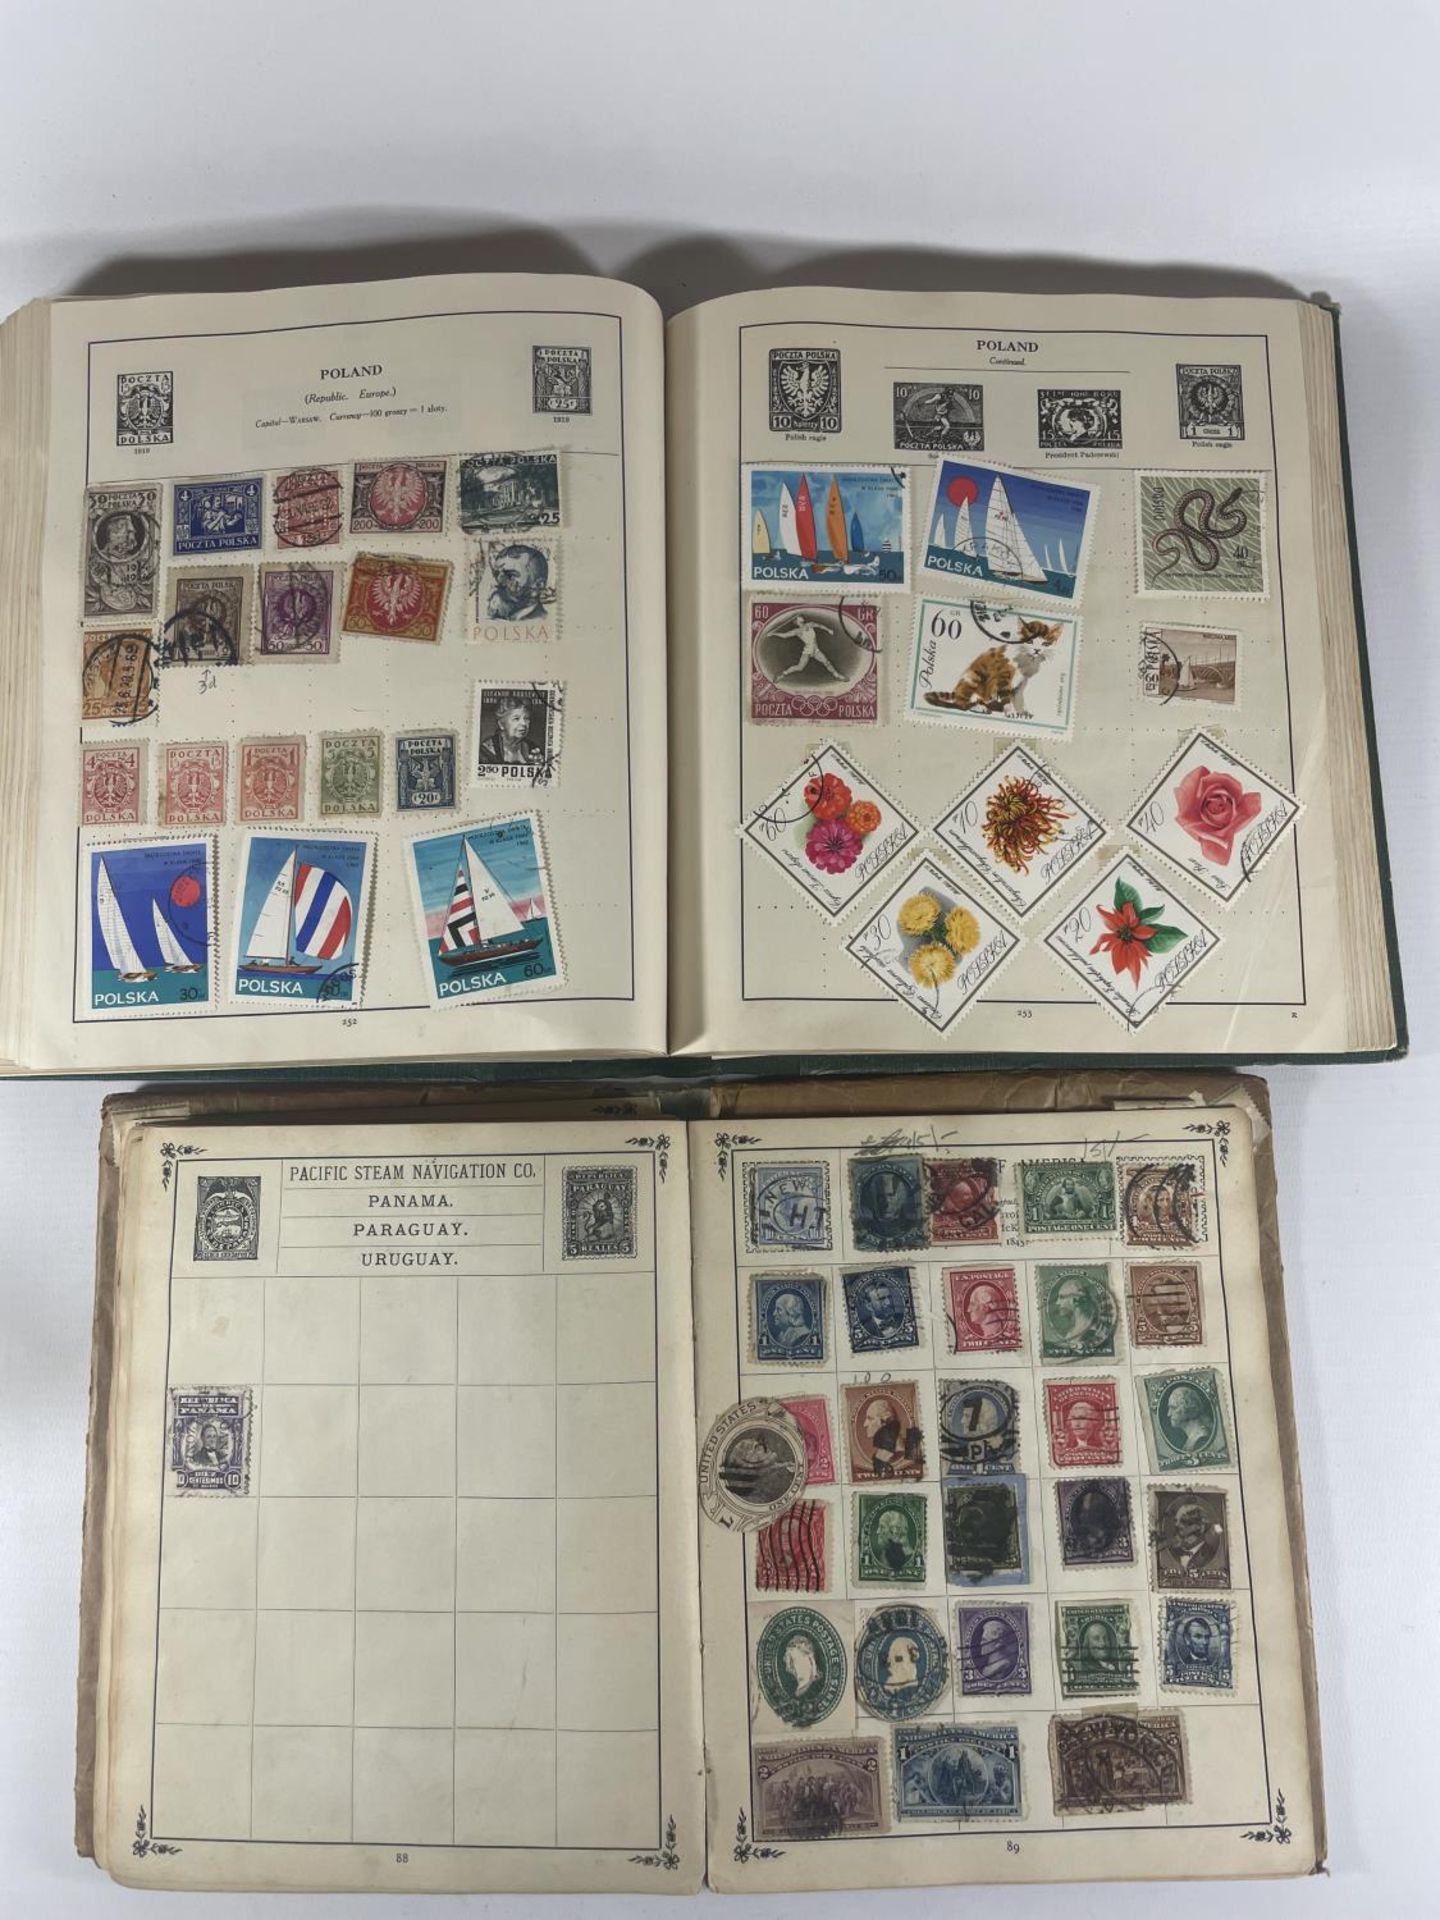 TWO VINTAGE STAMP ALBUMS INCLUDING THE WELL FILLED VICEROY AND THE ROYAL . MANY USEFUL ITEMS NOTED - Image 2 of 4